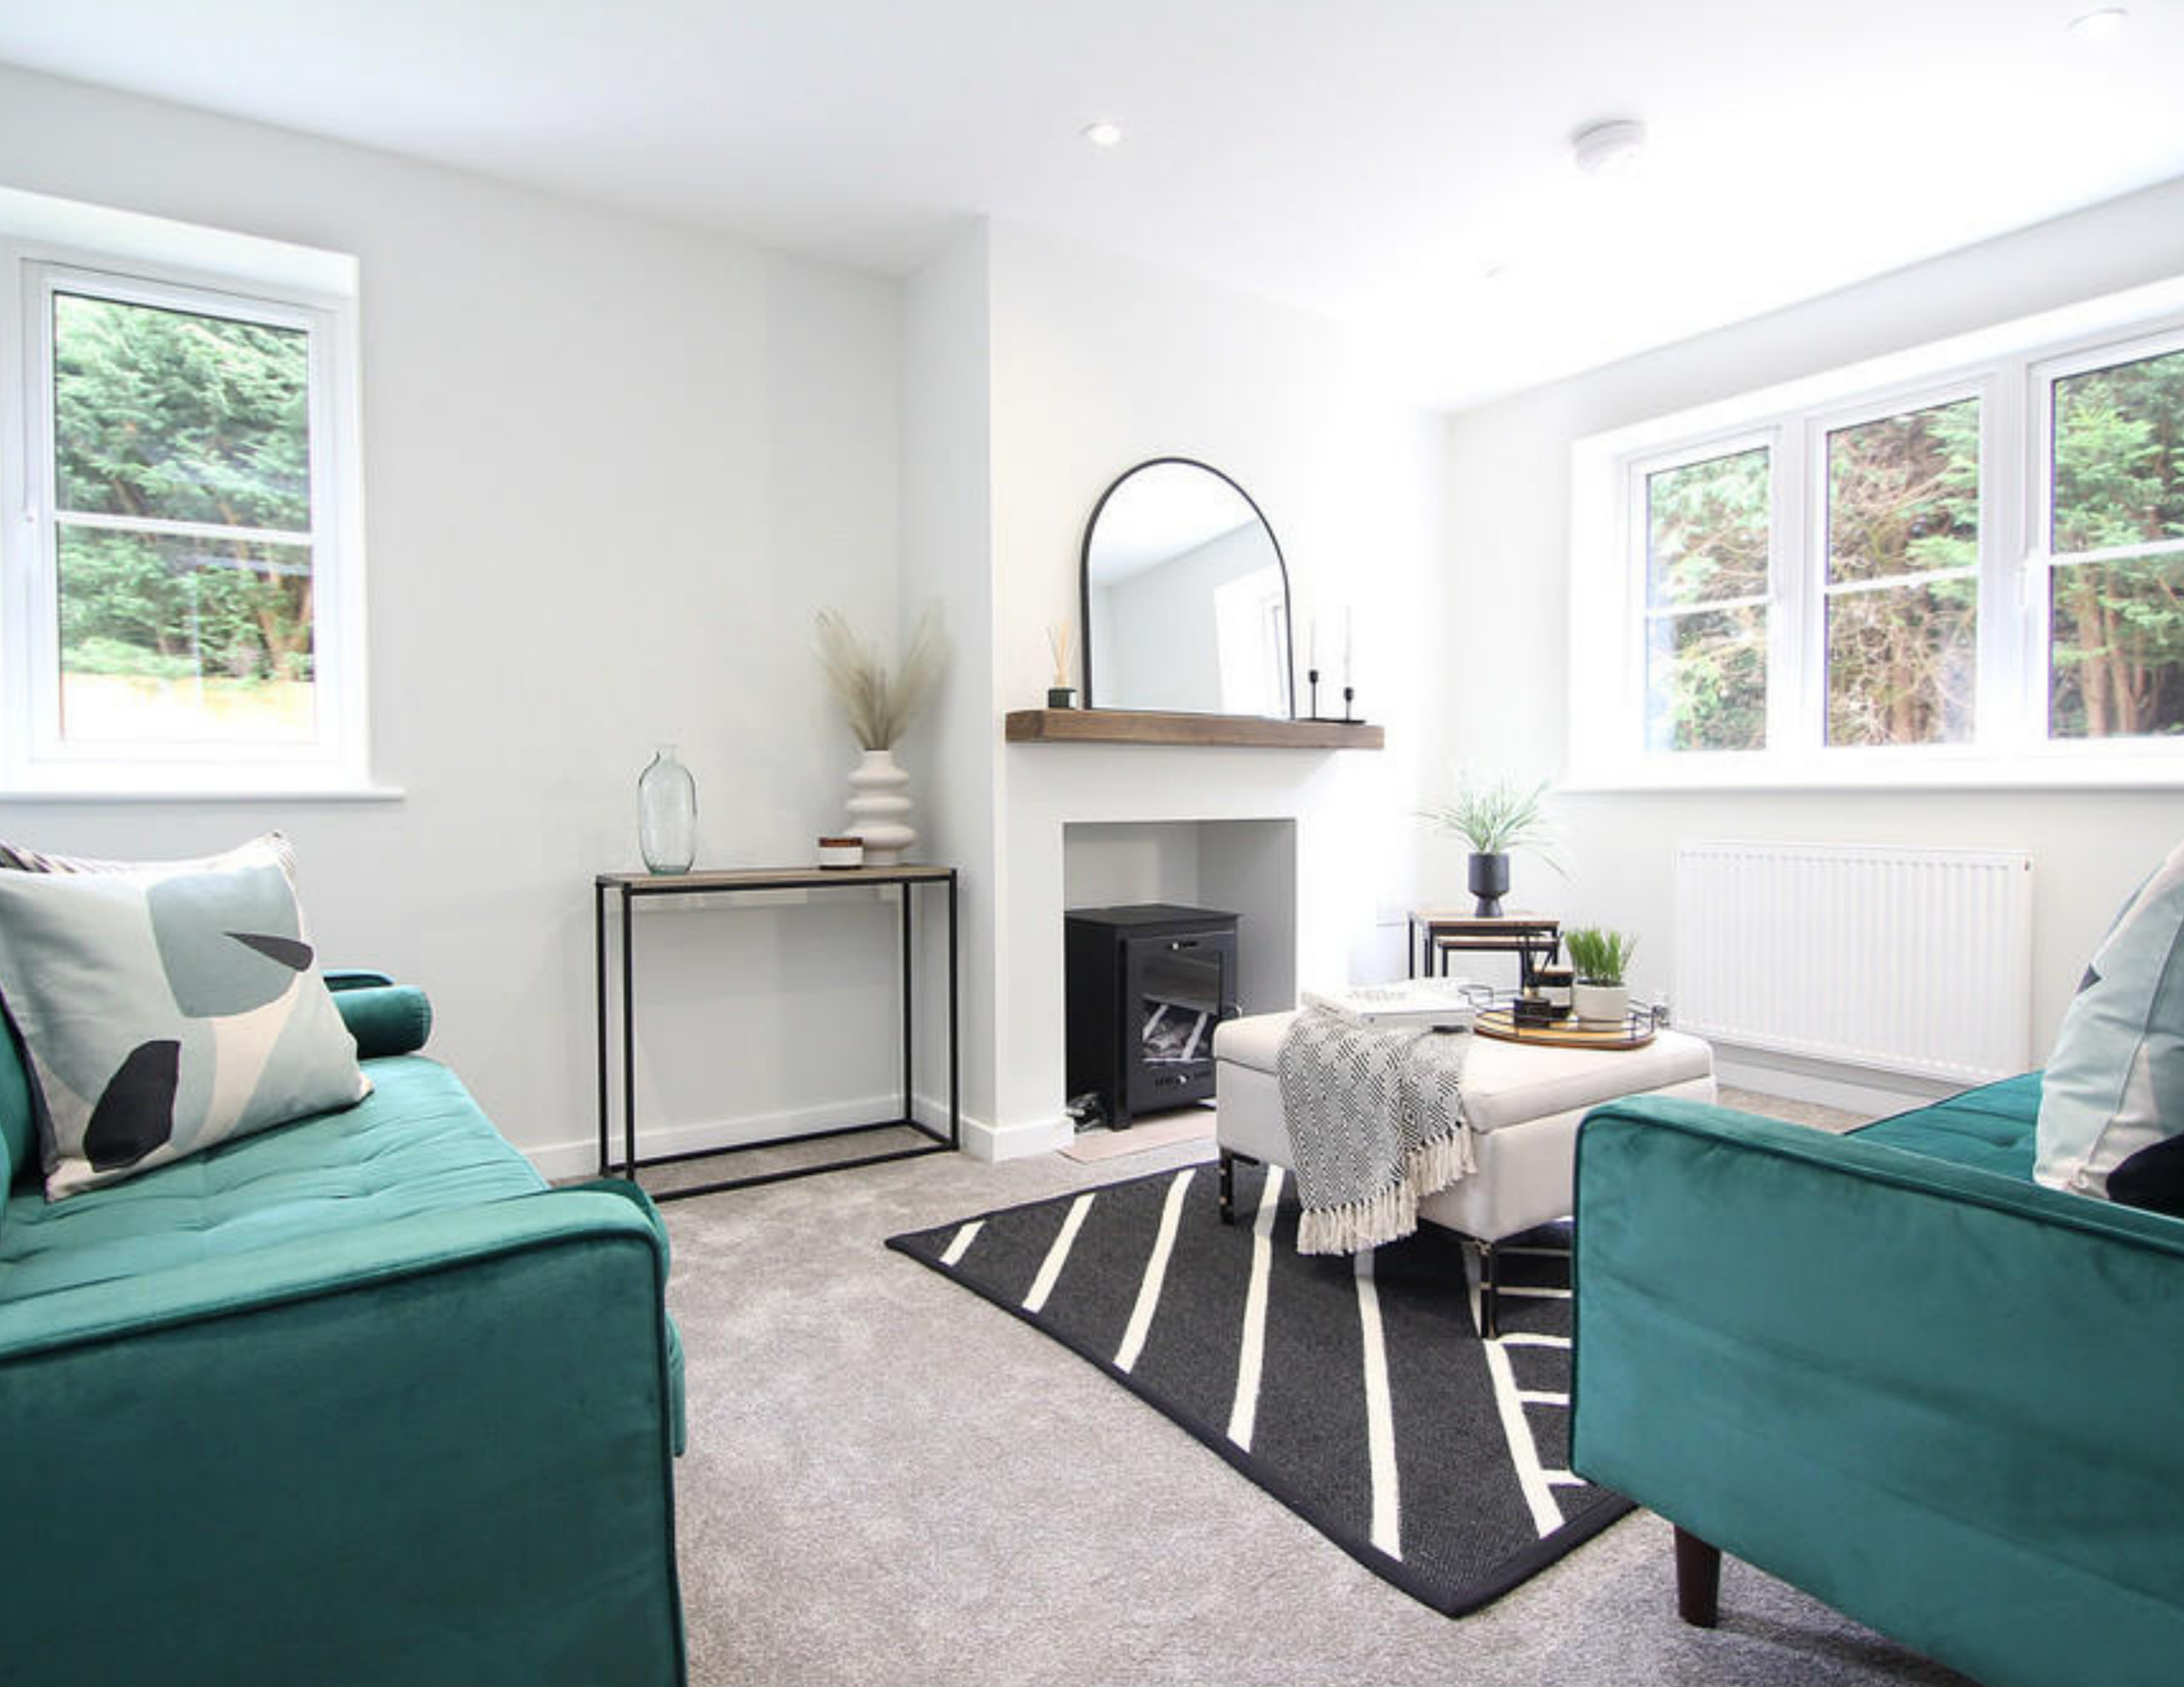 Living Room - Staged to Sell - Balsall Common - After Image